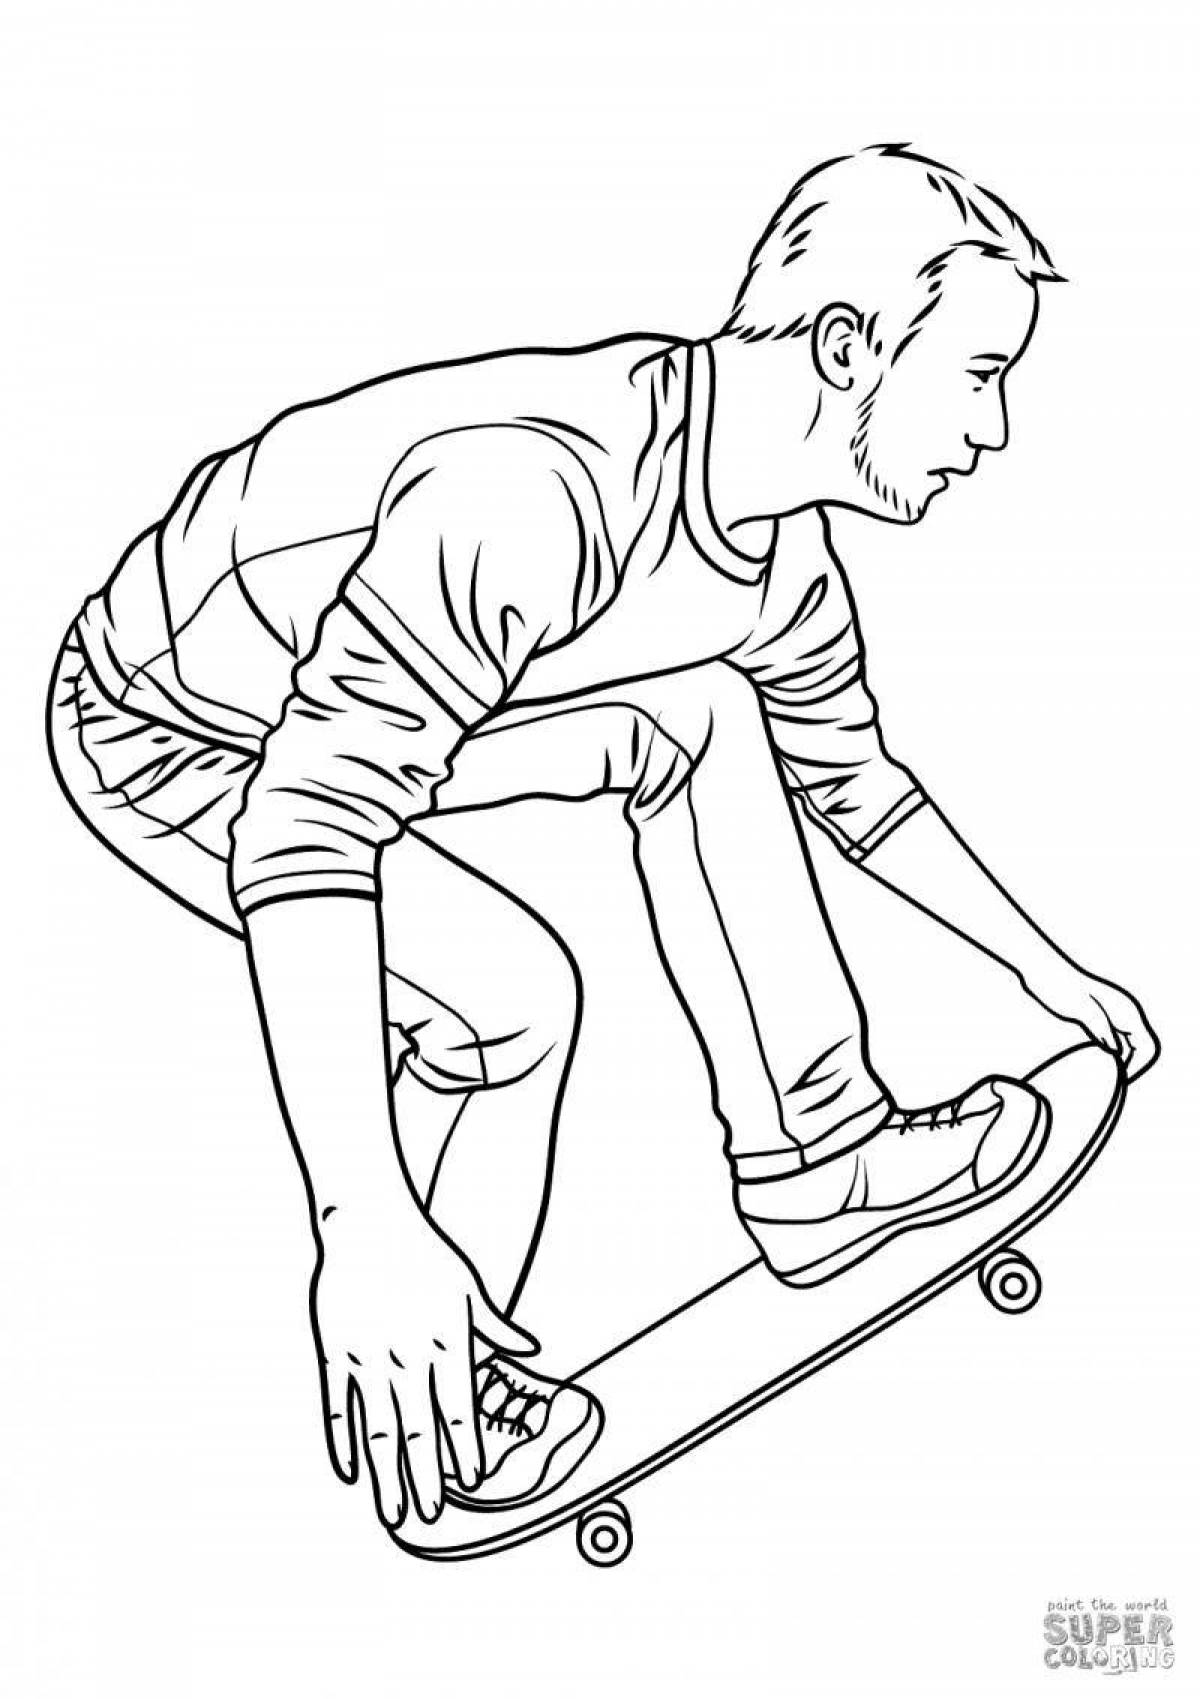 Awesome skateboard coloring book